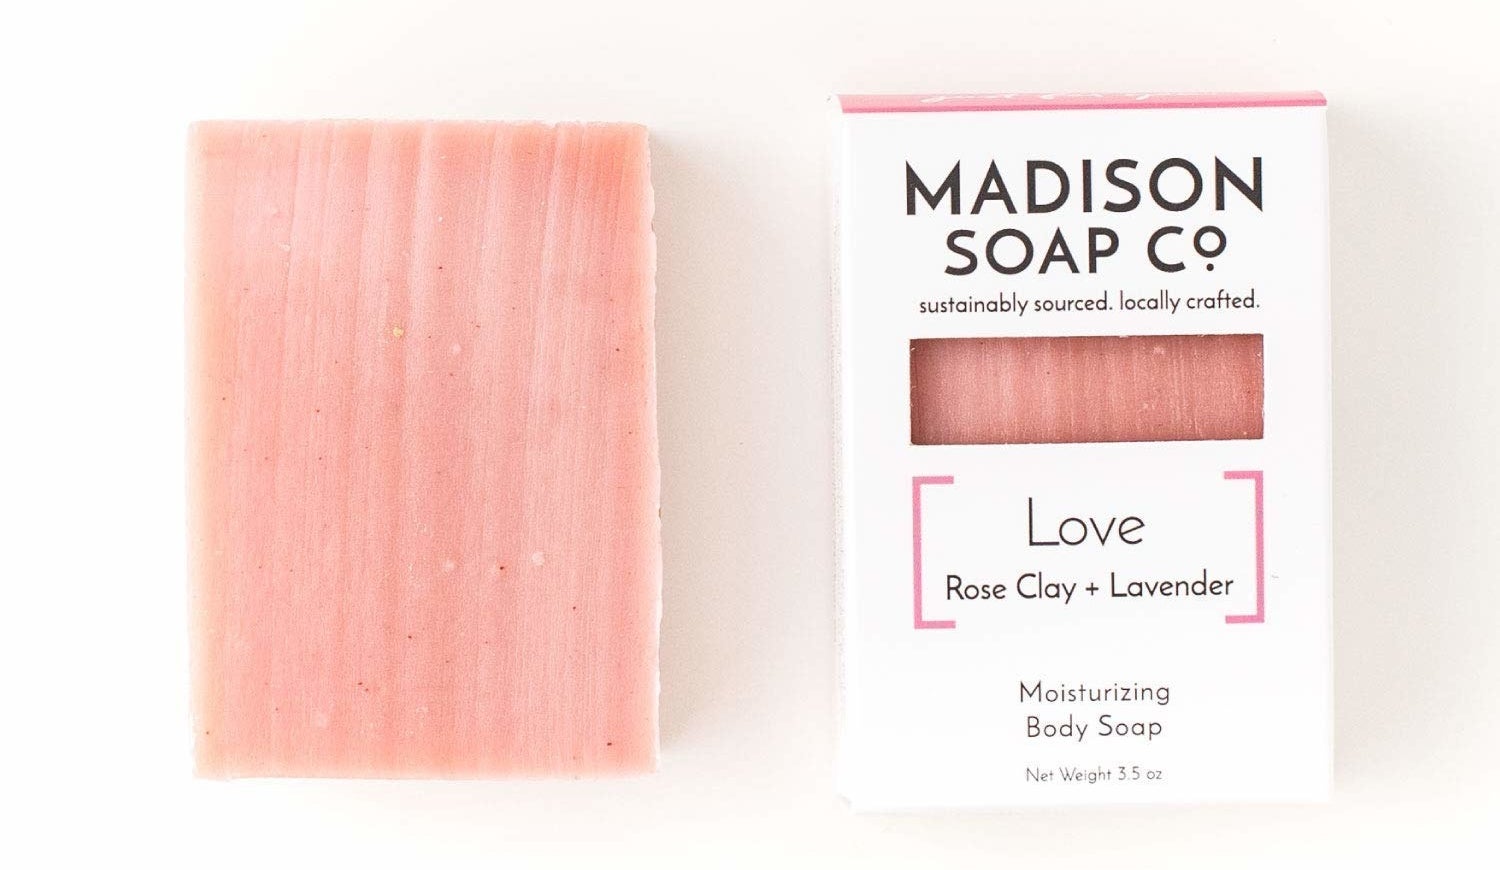 the pink soap and its package